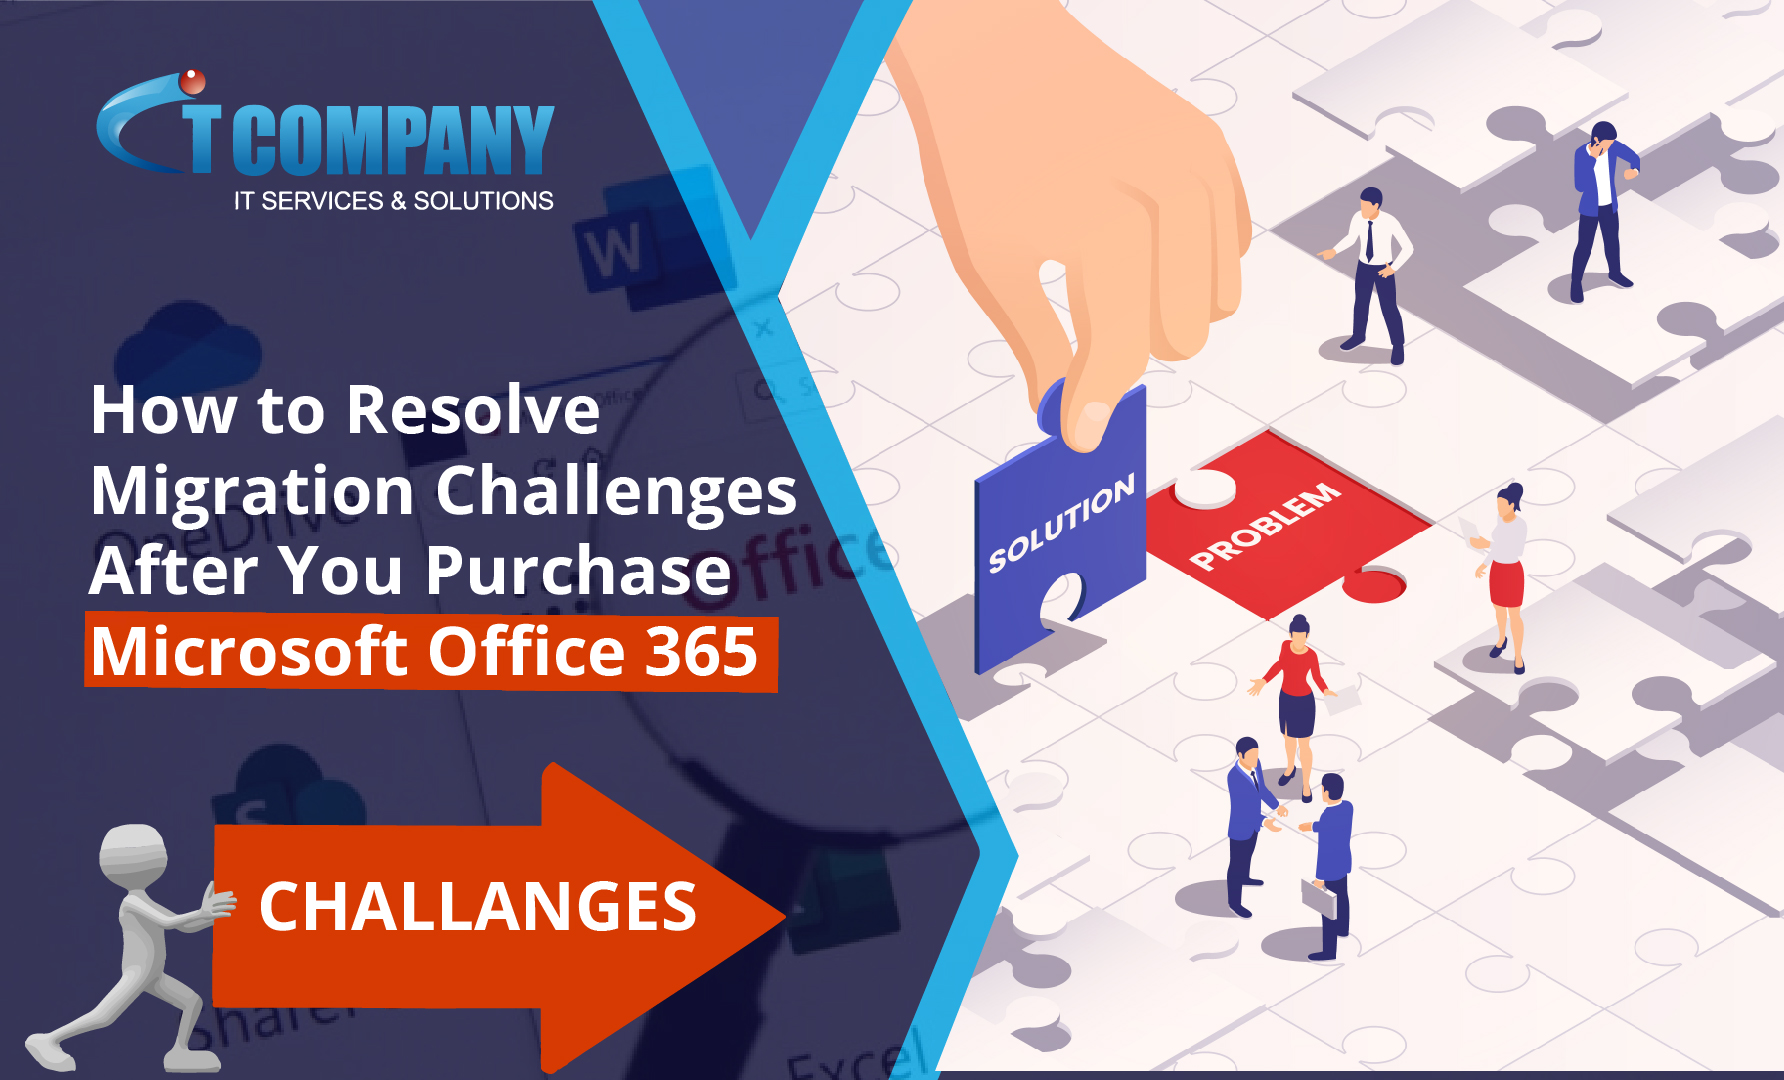 How to Resolve Migration Challenges After You Purchase Microsoft Office 365